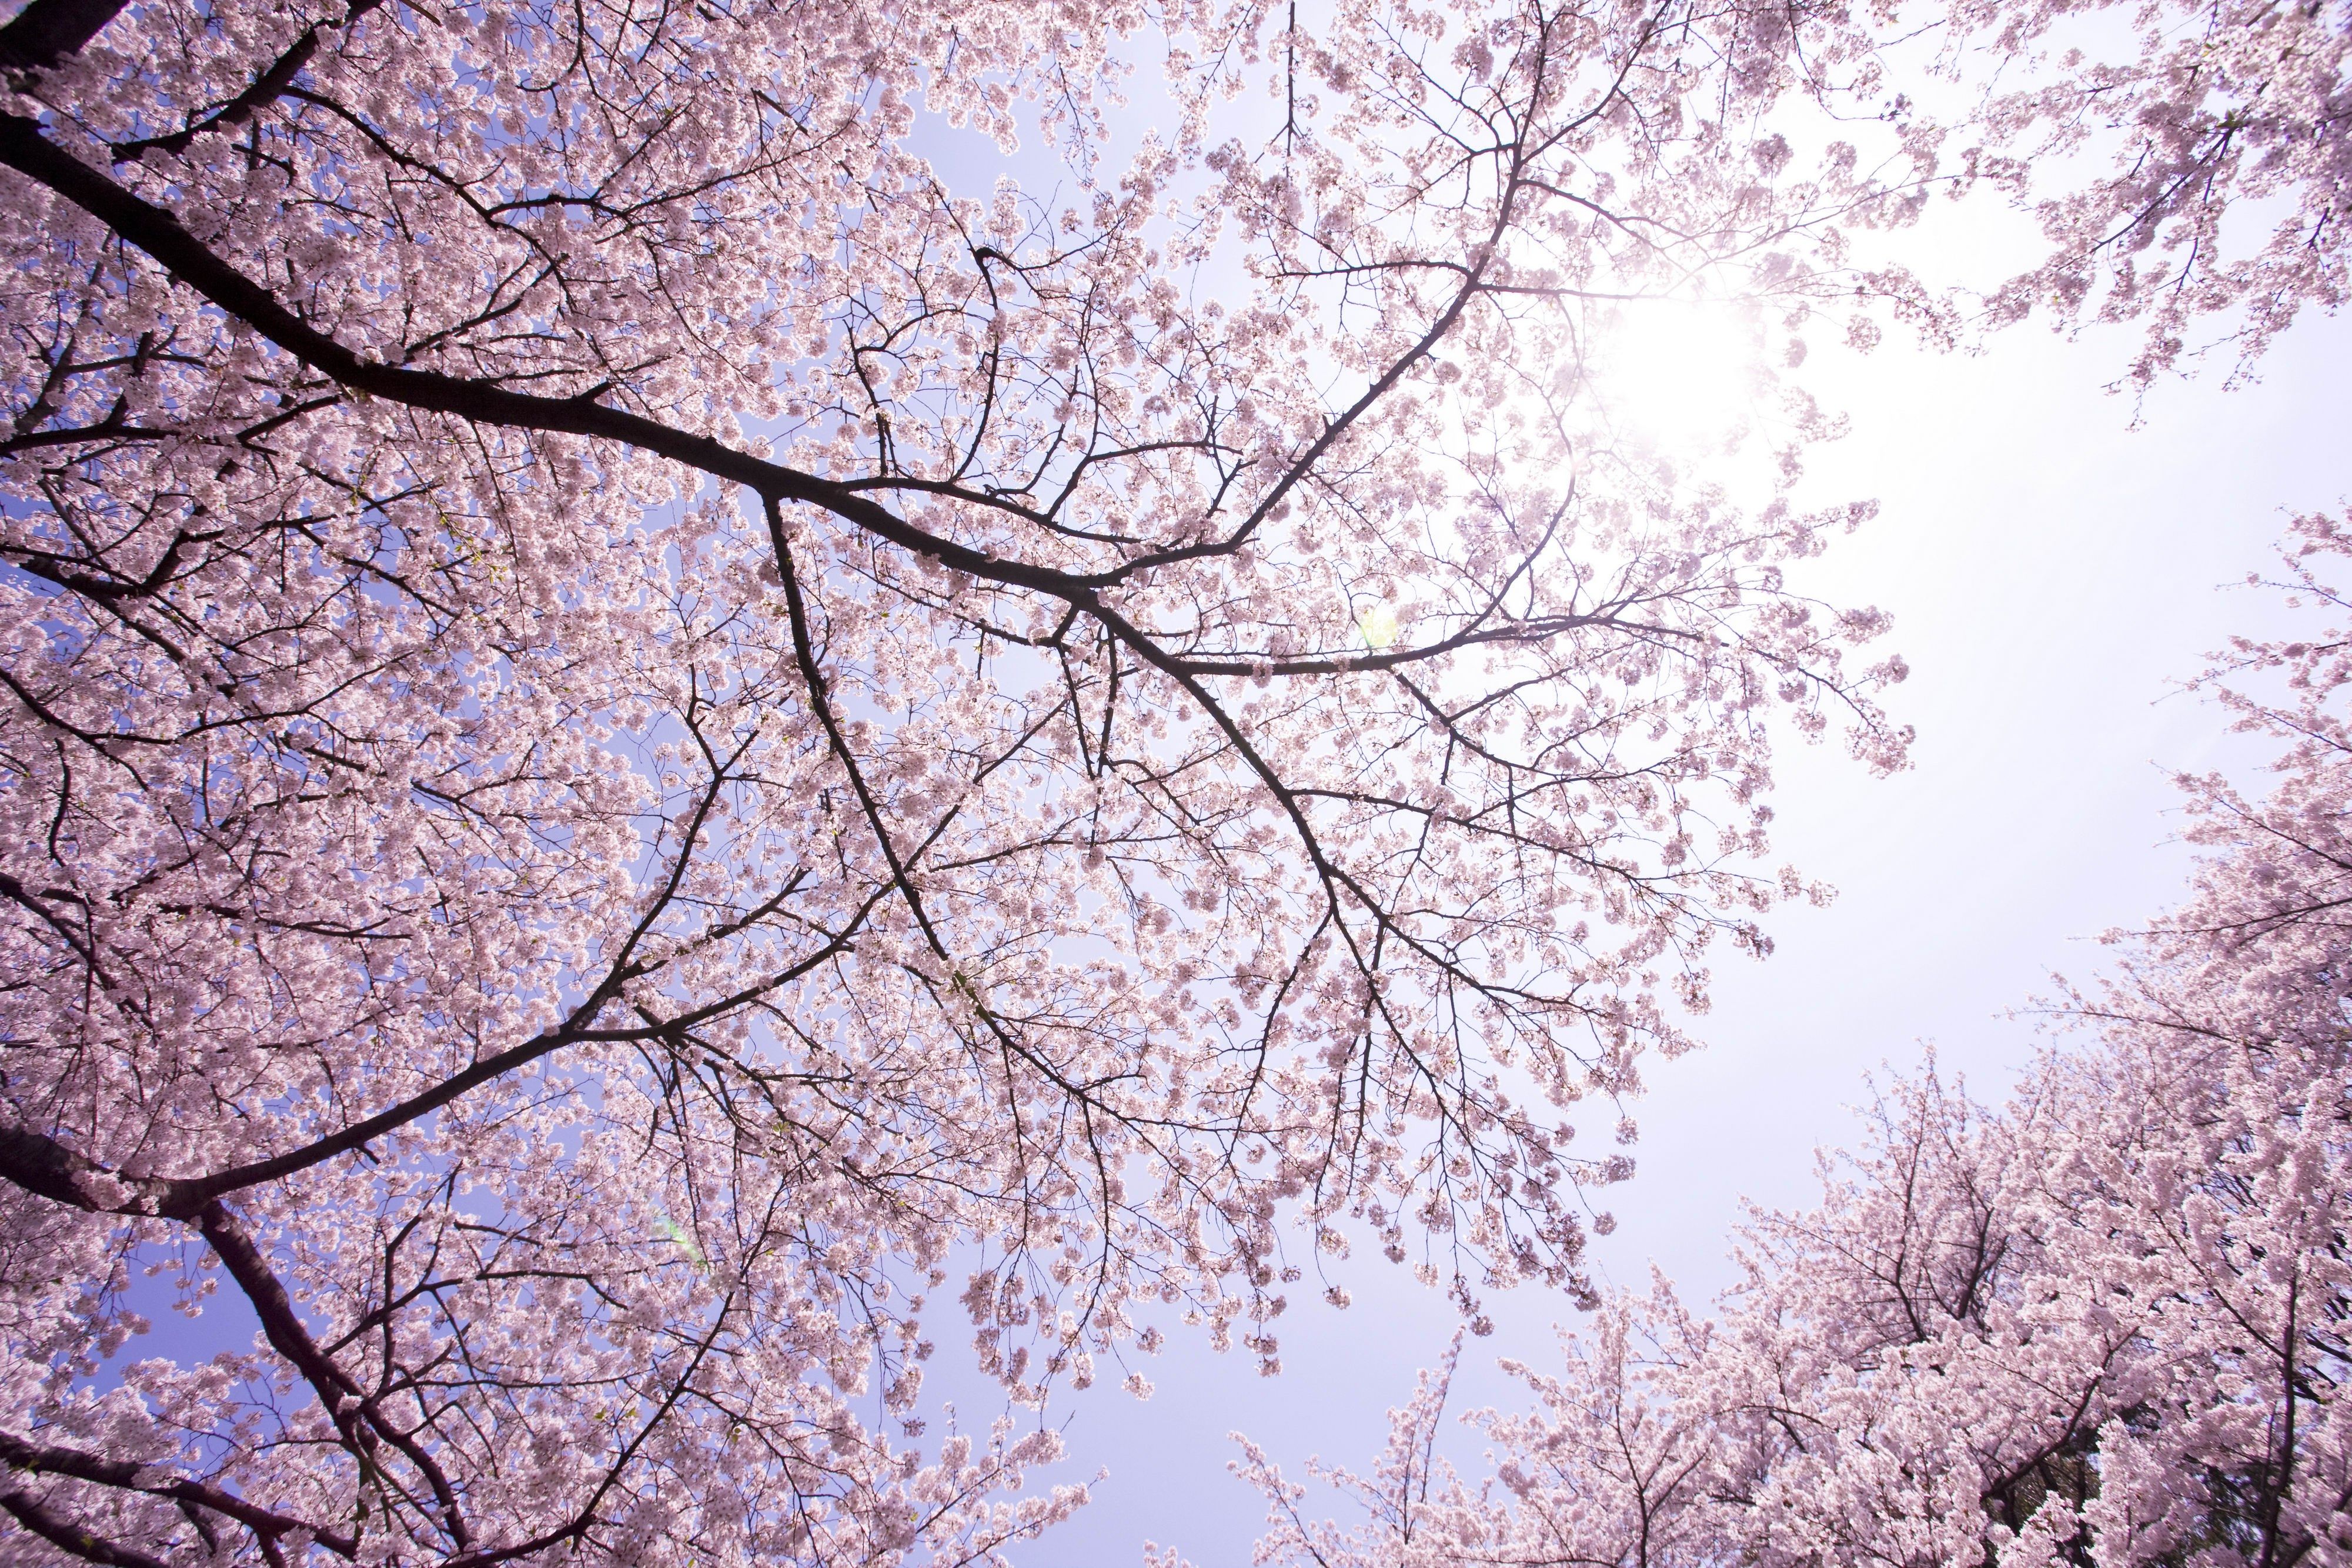 A beautiful cherry blossom tree with a bright blue sky in the background. - Cherry blossom